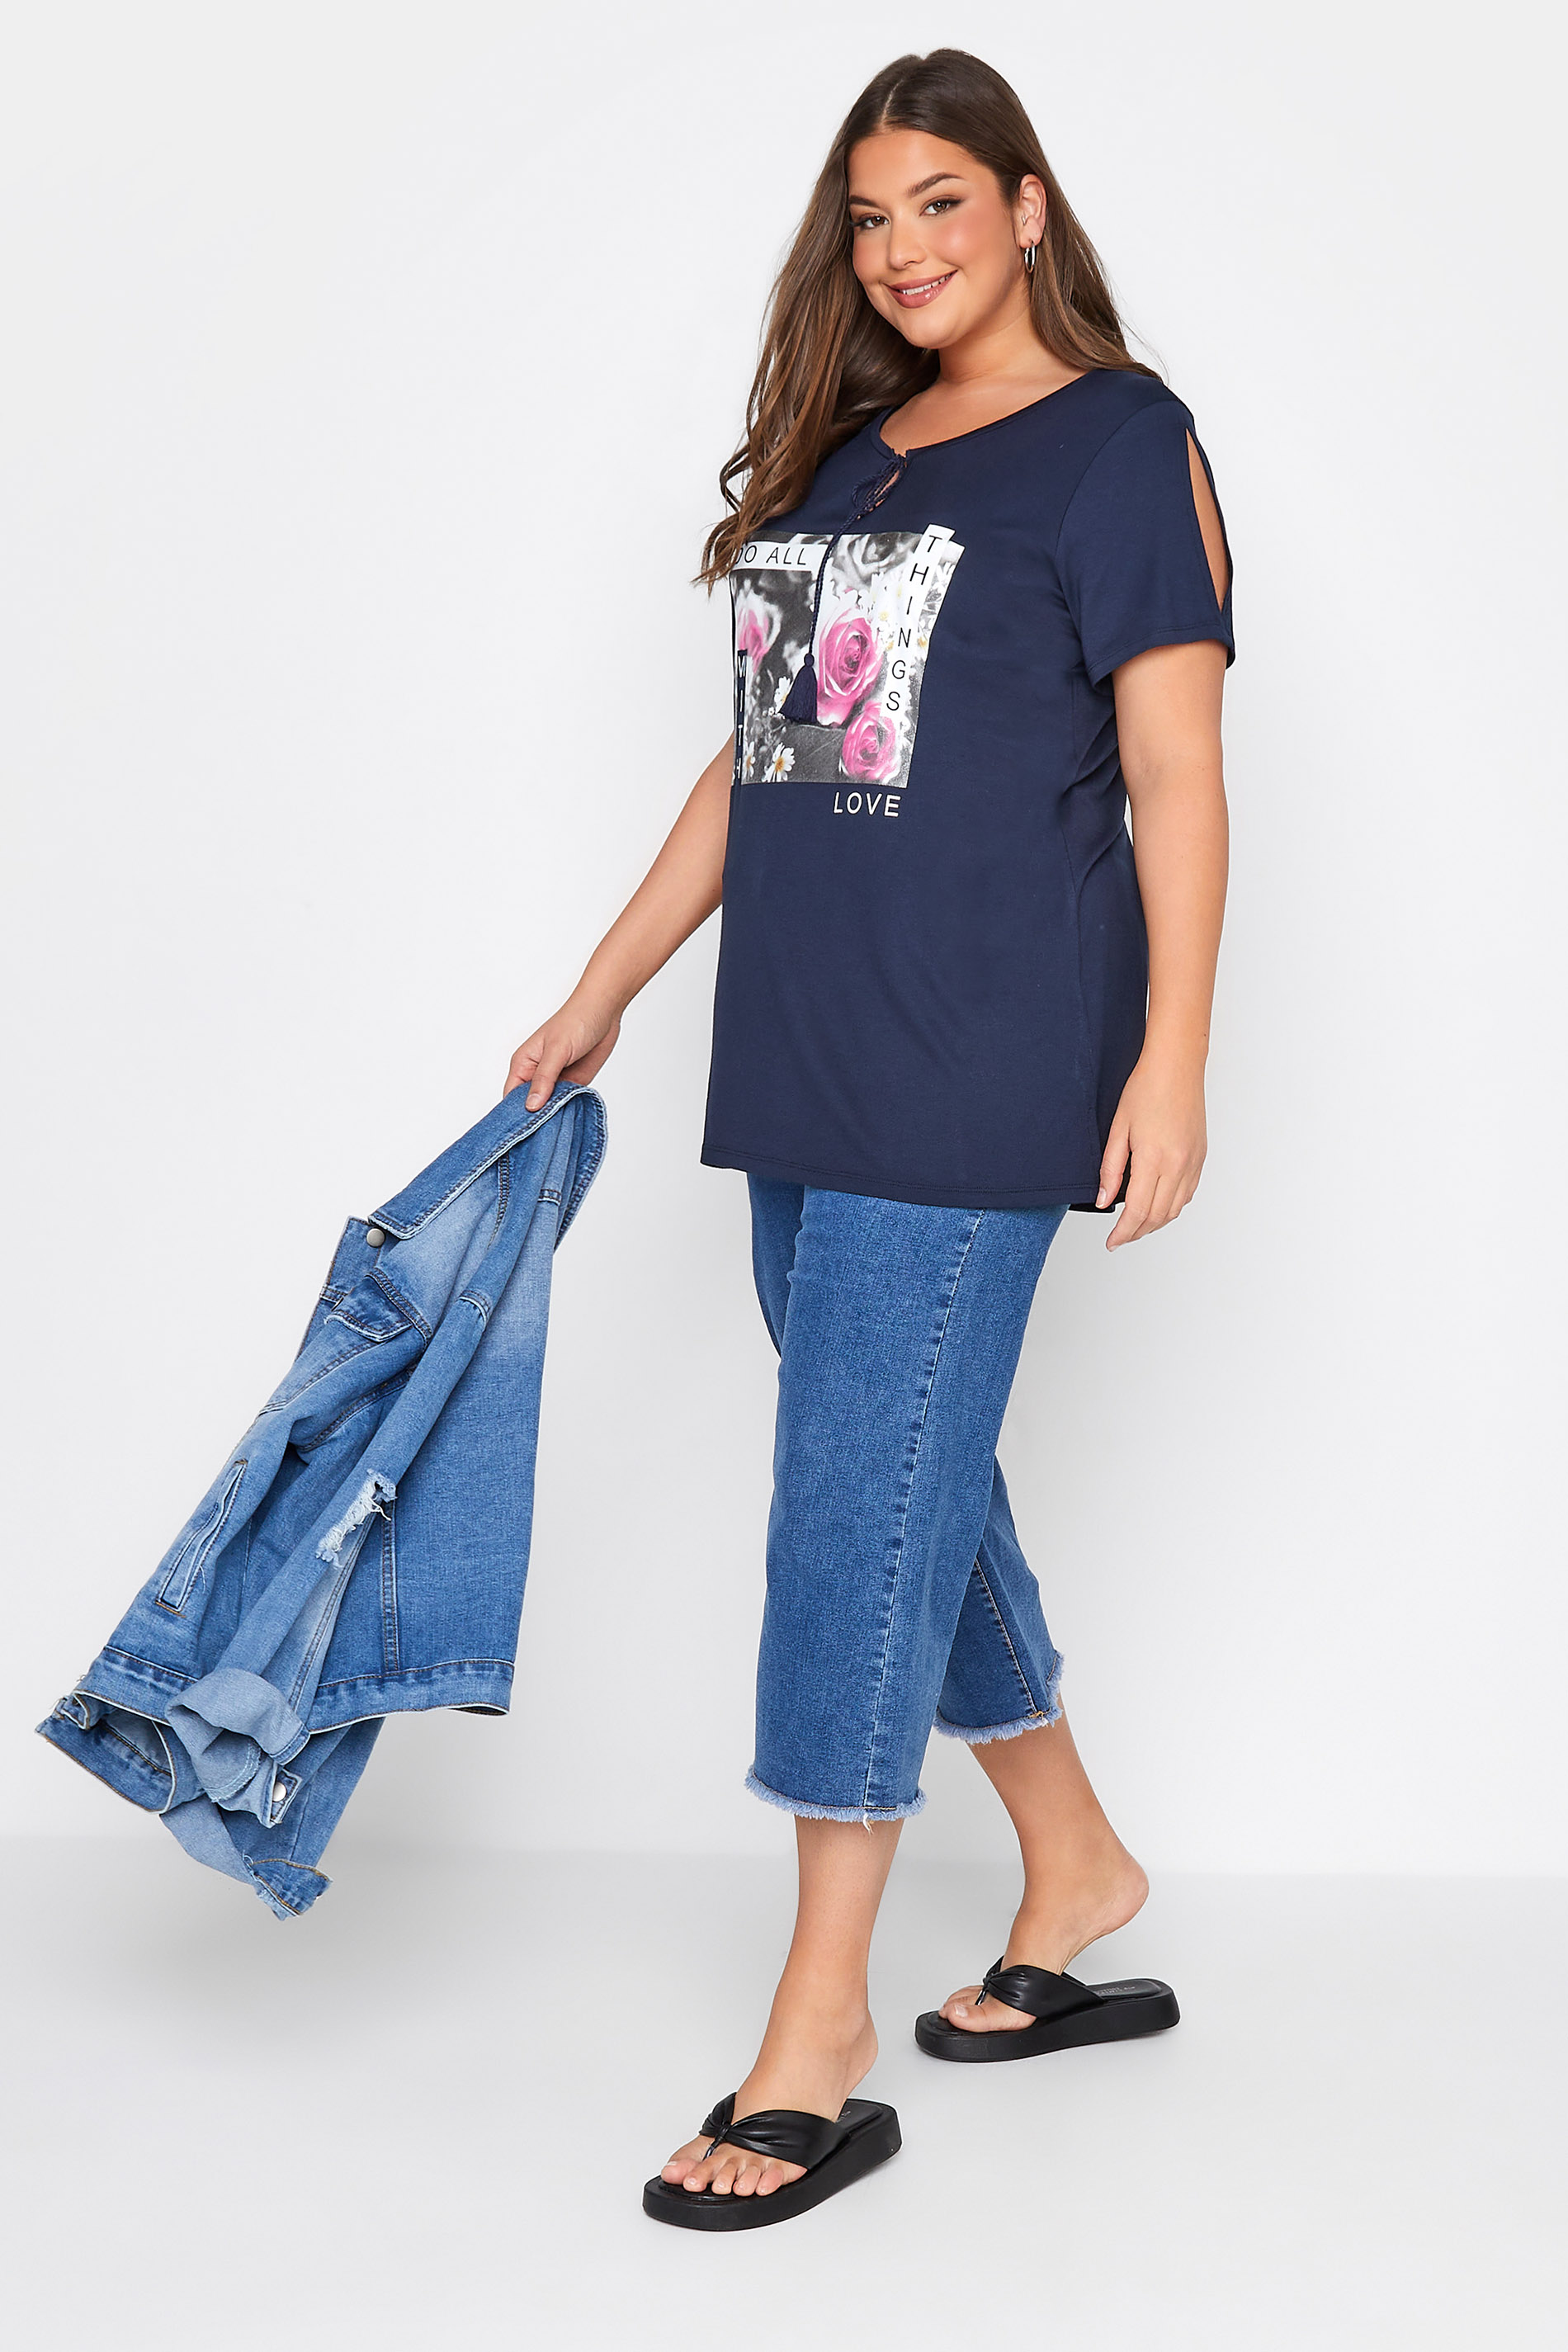 Grande taille  Tops Grande taille  Tops à Slogans | T-Shirt Bleu Marine Slogan 'All things with love' en Jersey - QO60227